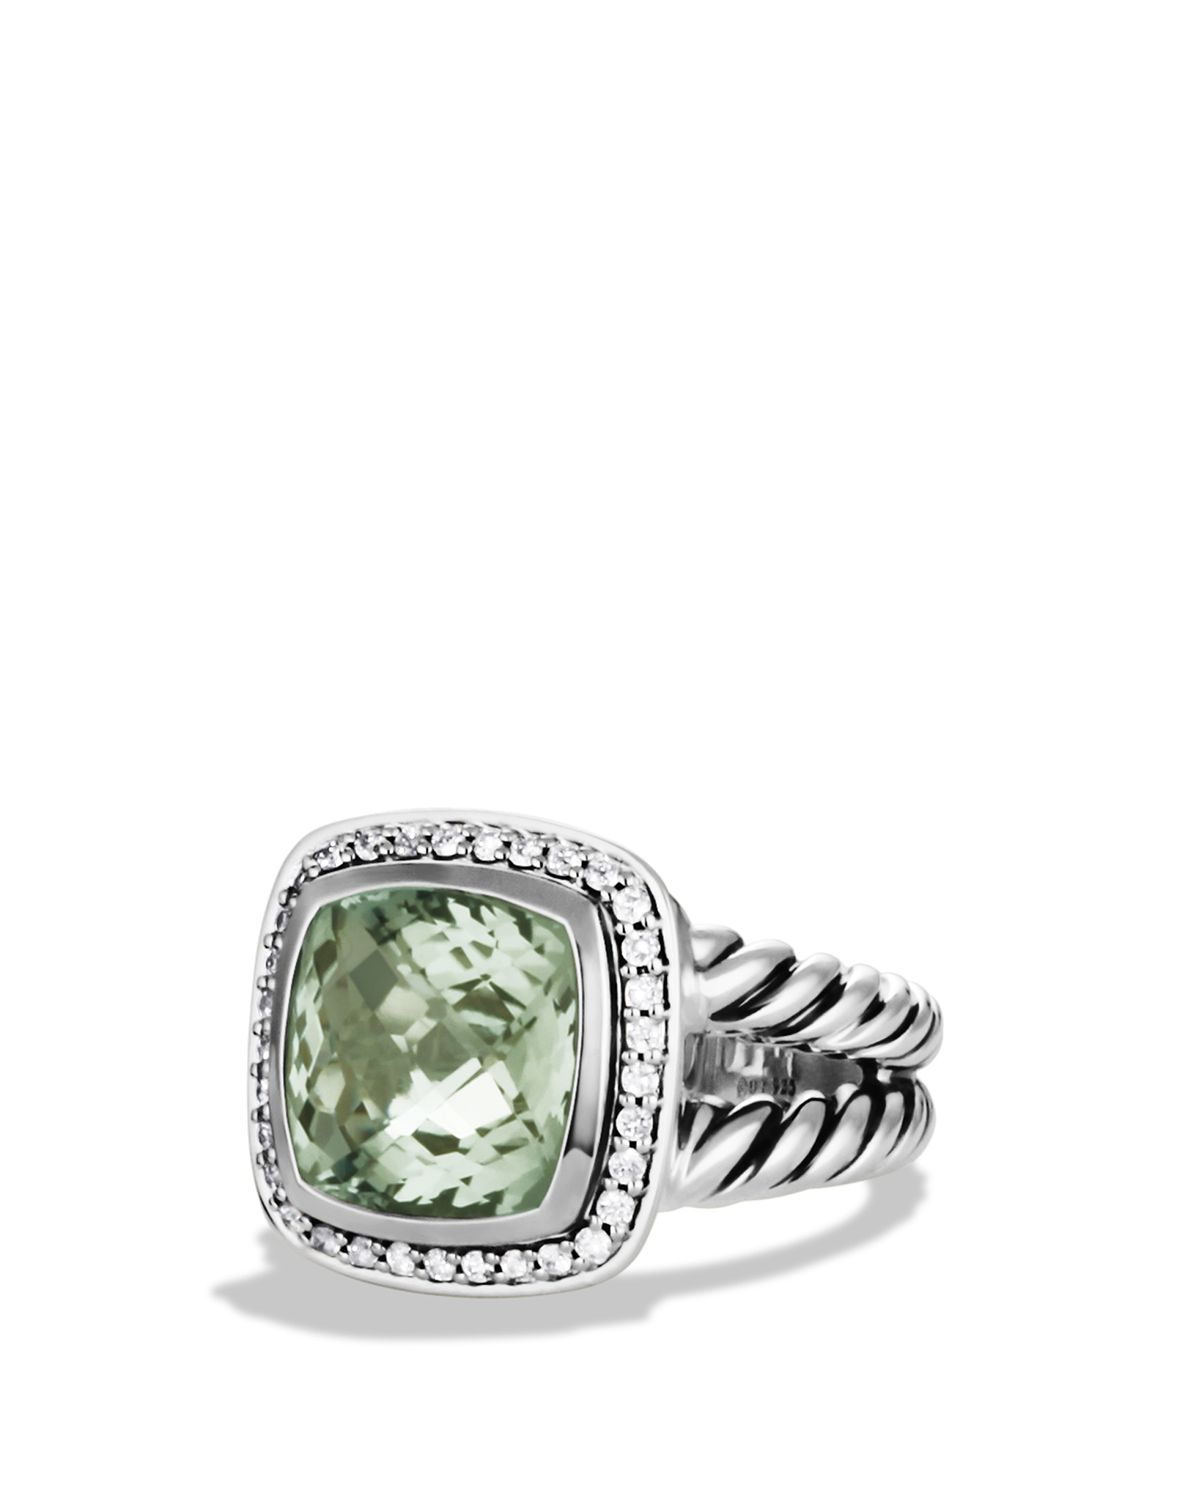 David Yurman Silver Albion Ring With Prasiolite And Diamonds Product 1 16936647 0 867538866 Normal 